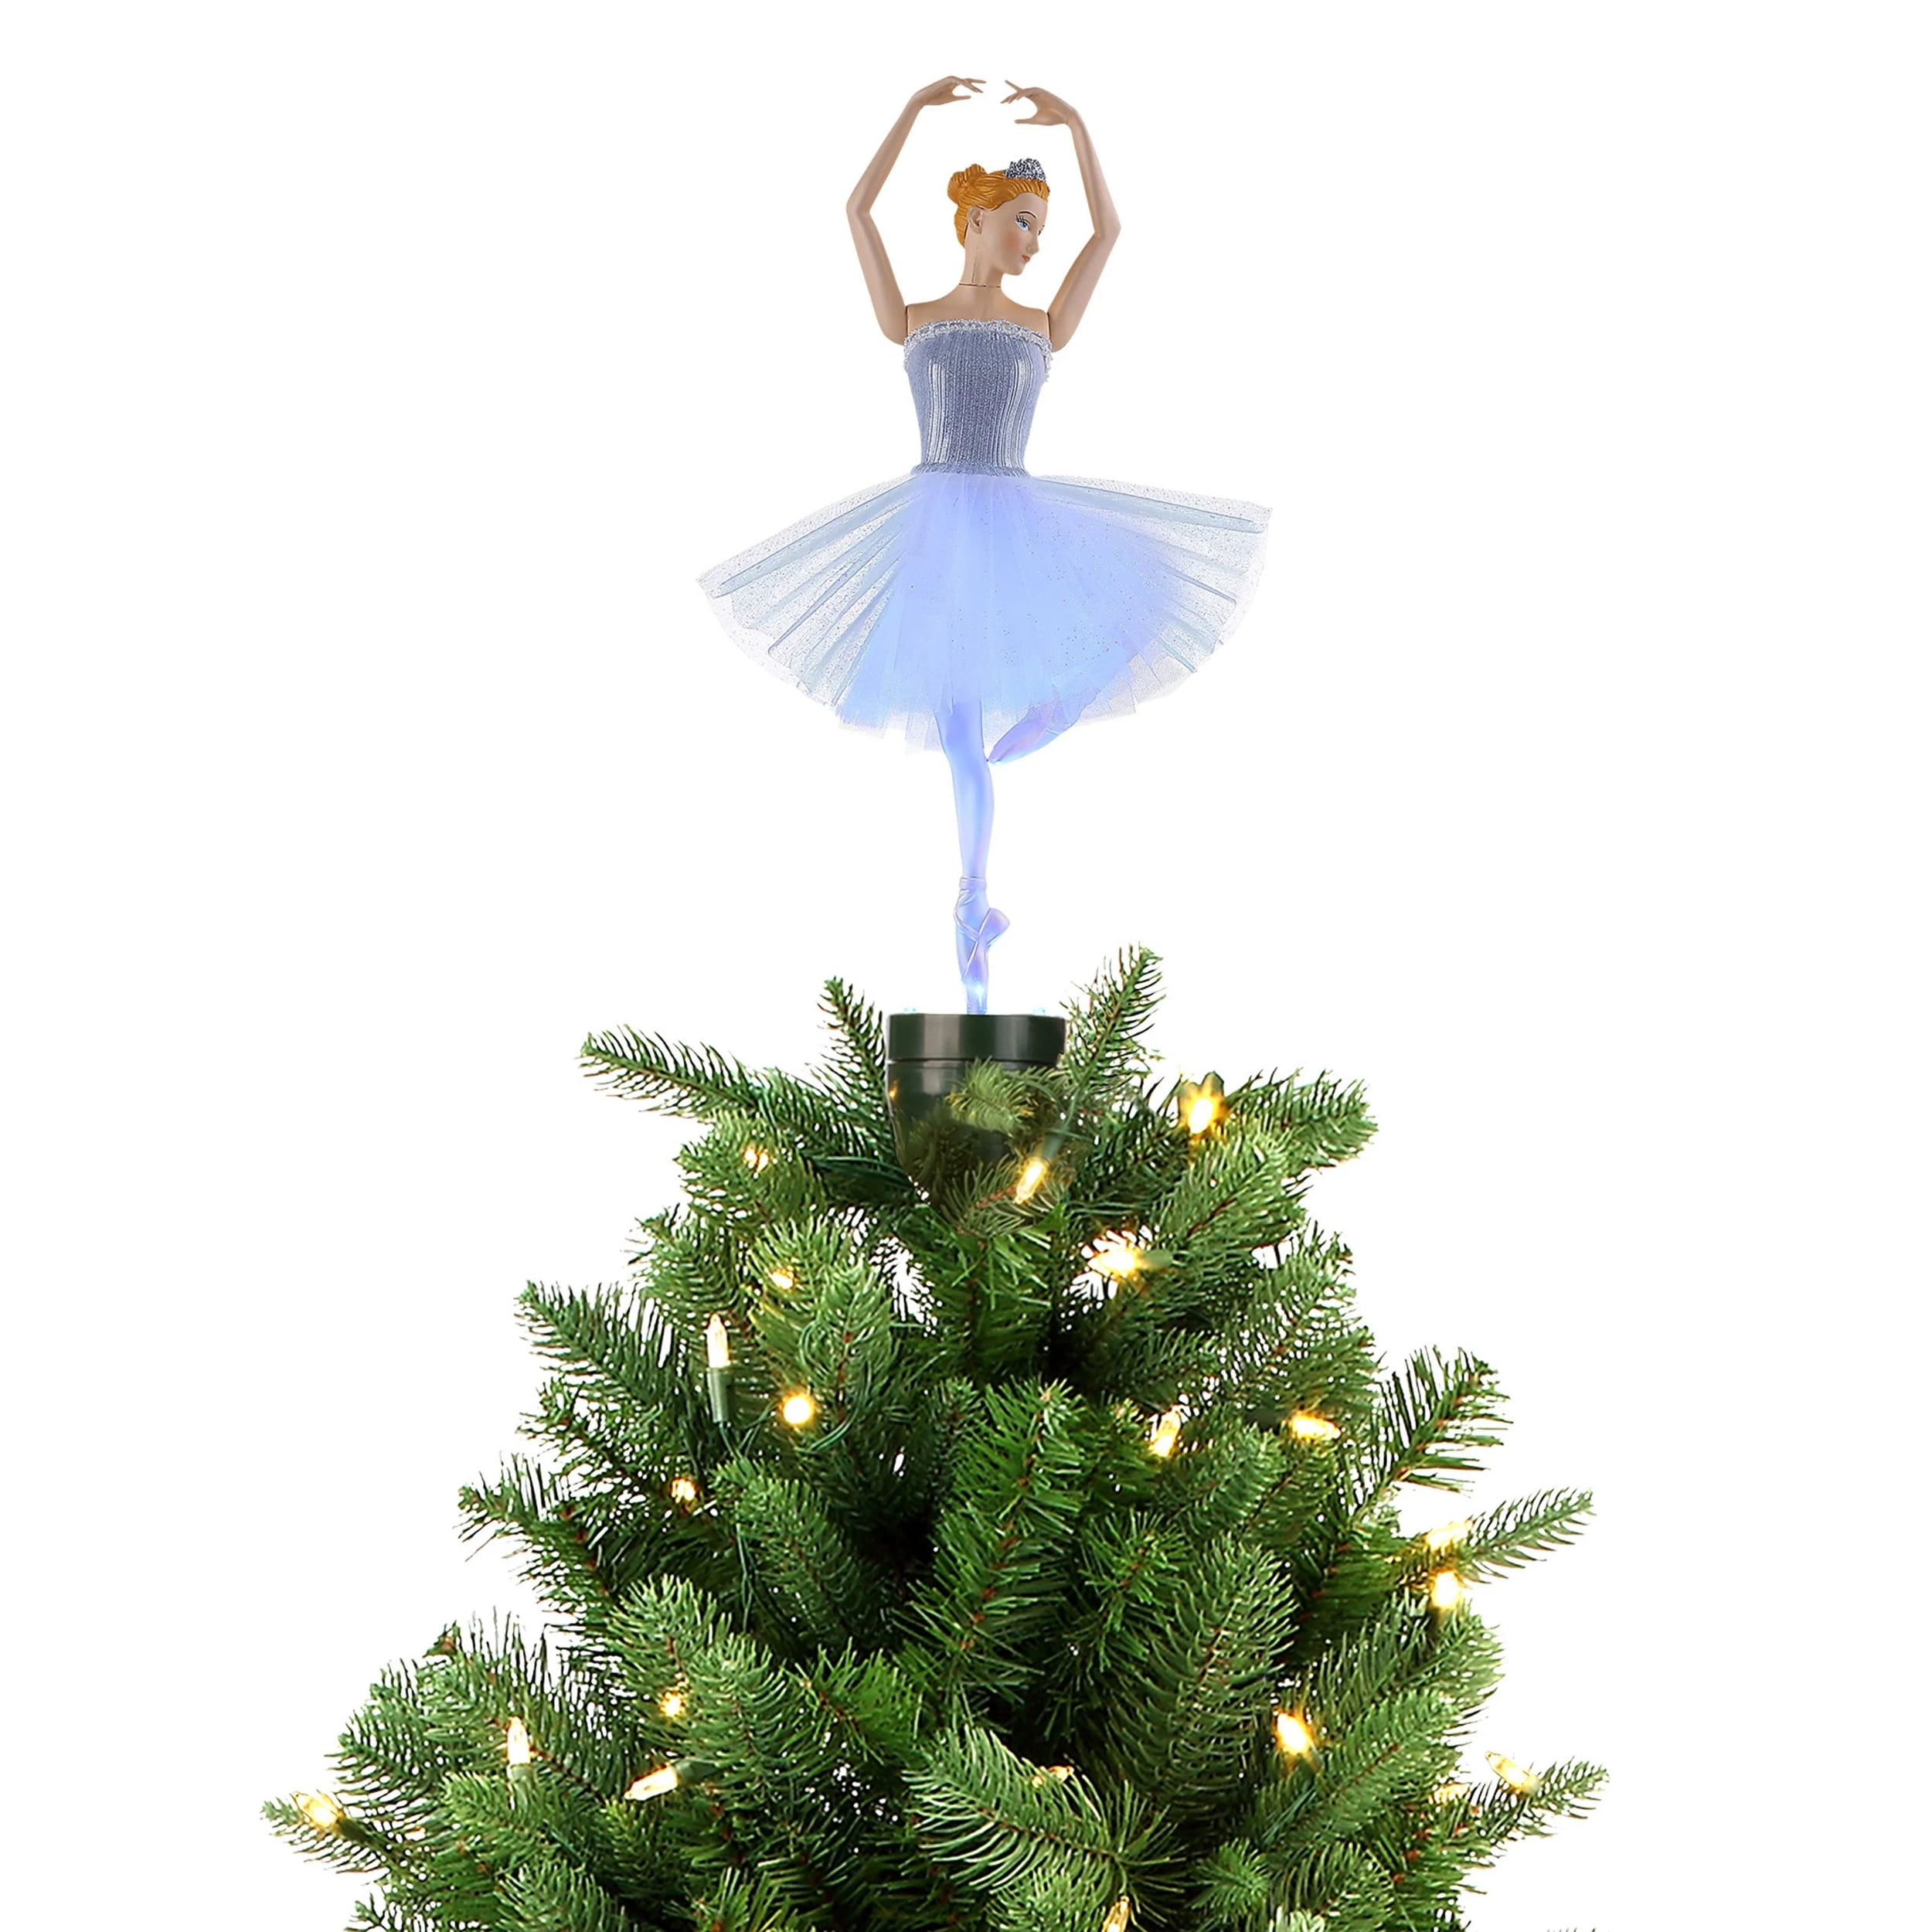 Picture of Mr. Christmas 9086712 12.5 in. Animated Fiber-Optic Ballerina Tree Topper